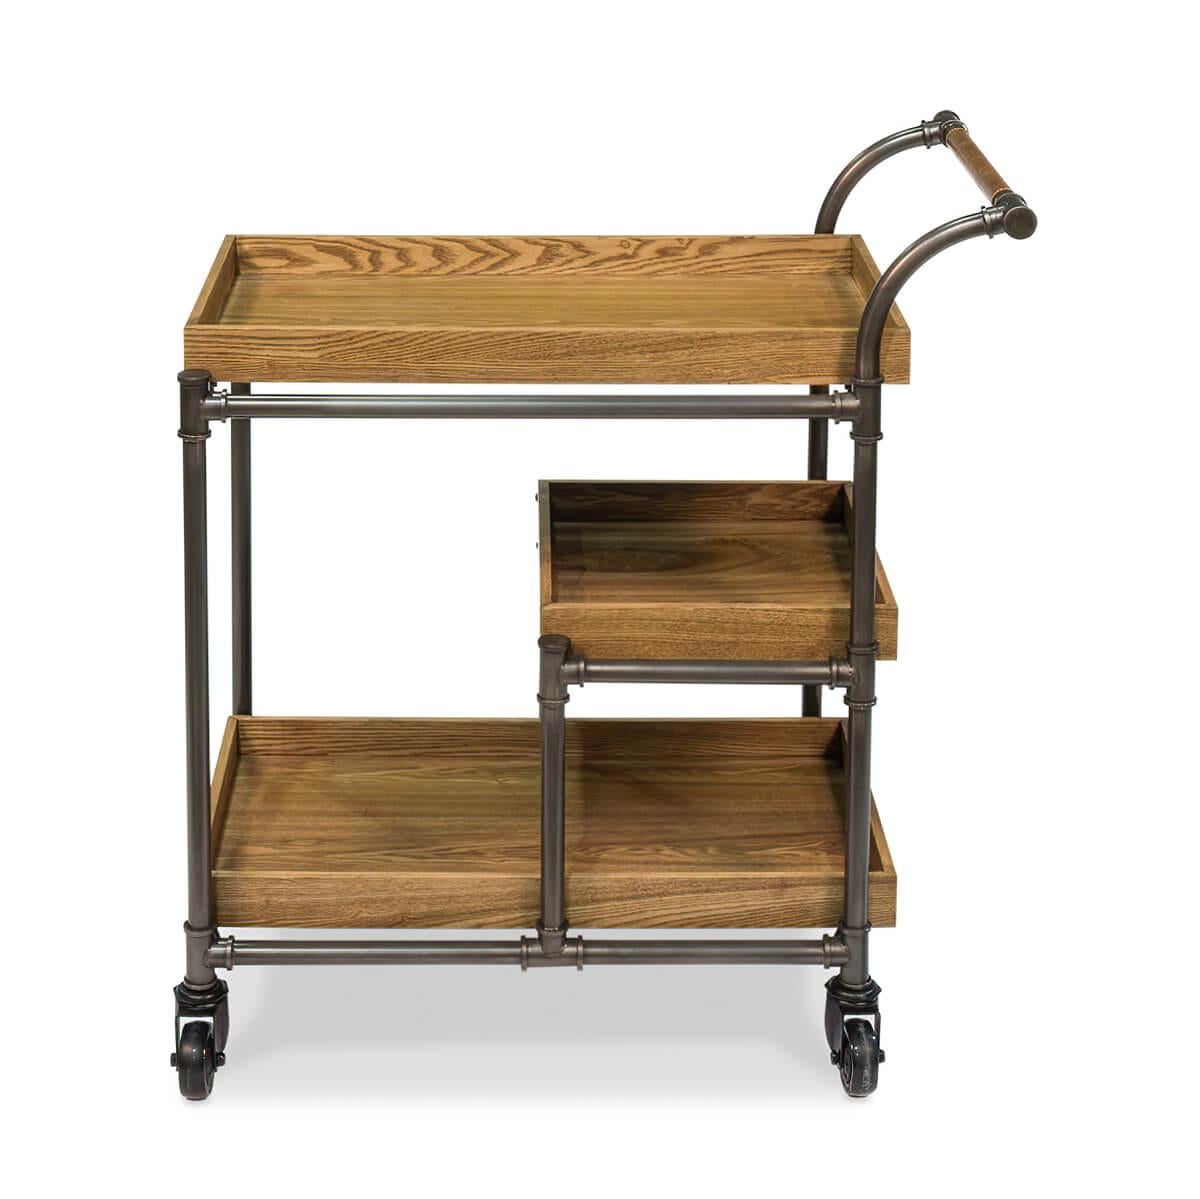 A modern Industrial style bar cart trolley with weathered oak wooden tray shelves and a pipe frame raised on large casters.

Dimensions: 20